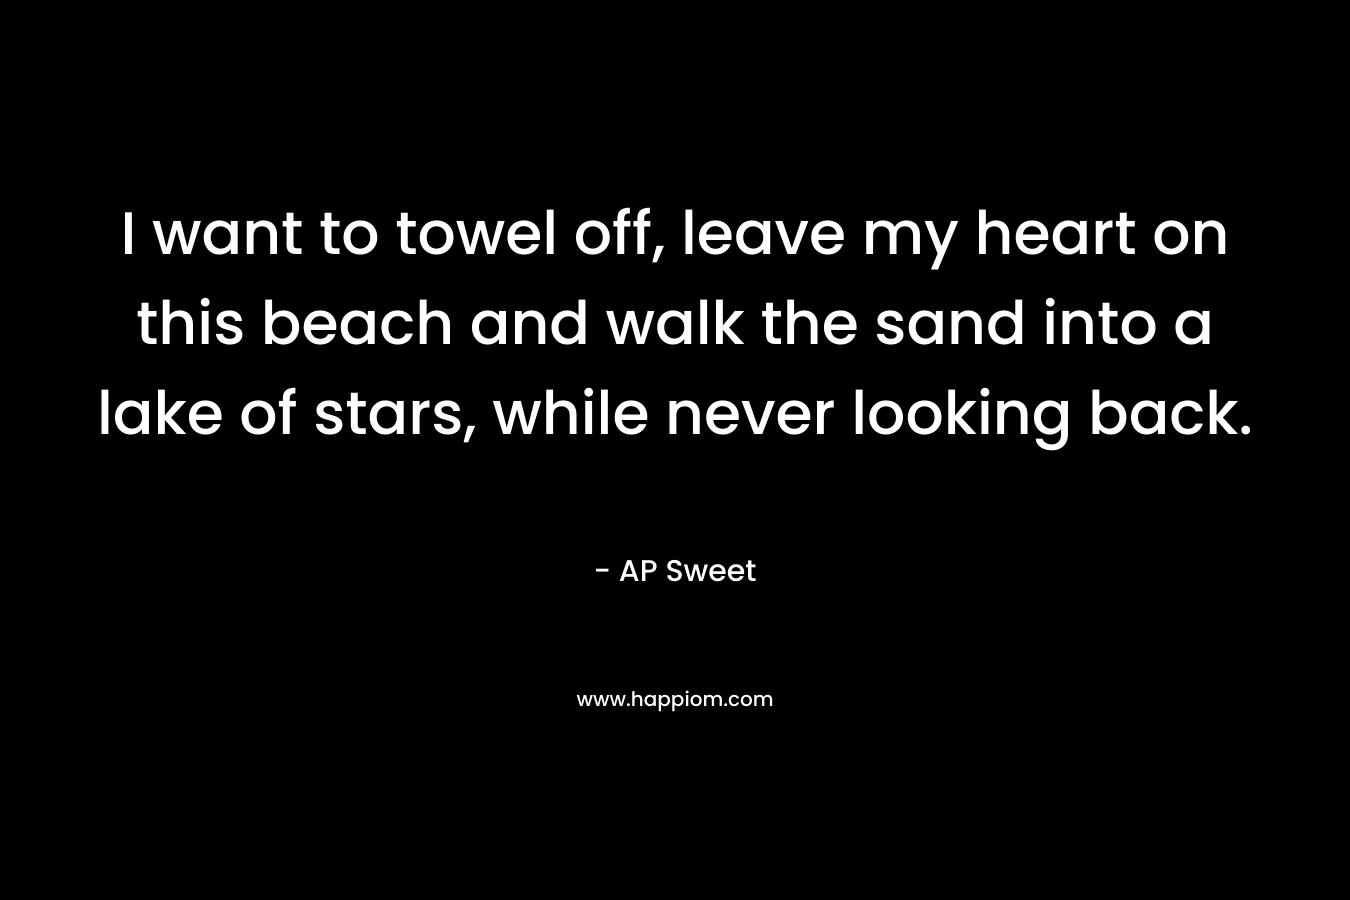 I want to towel off, leave my heart on this beach and walk the sand into a lake of stars, while never looking back.